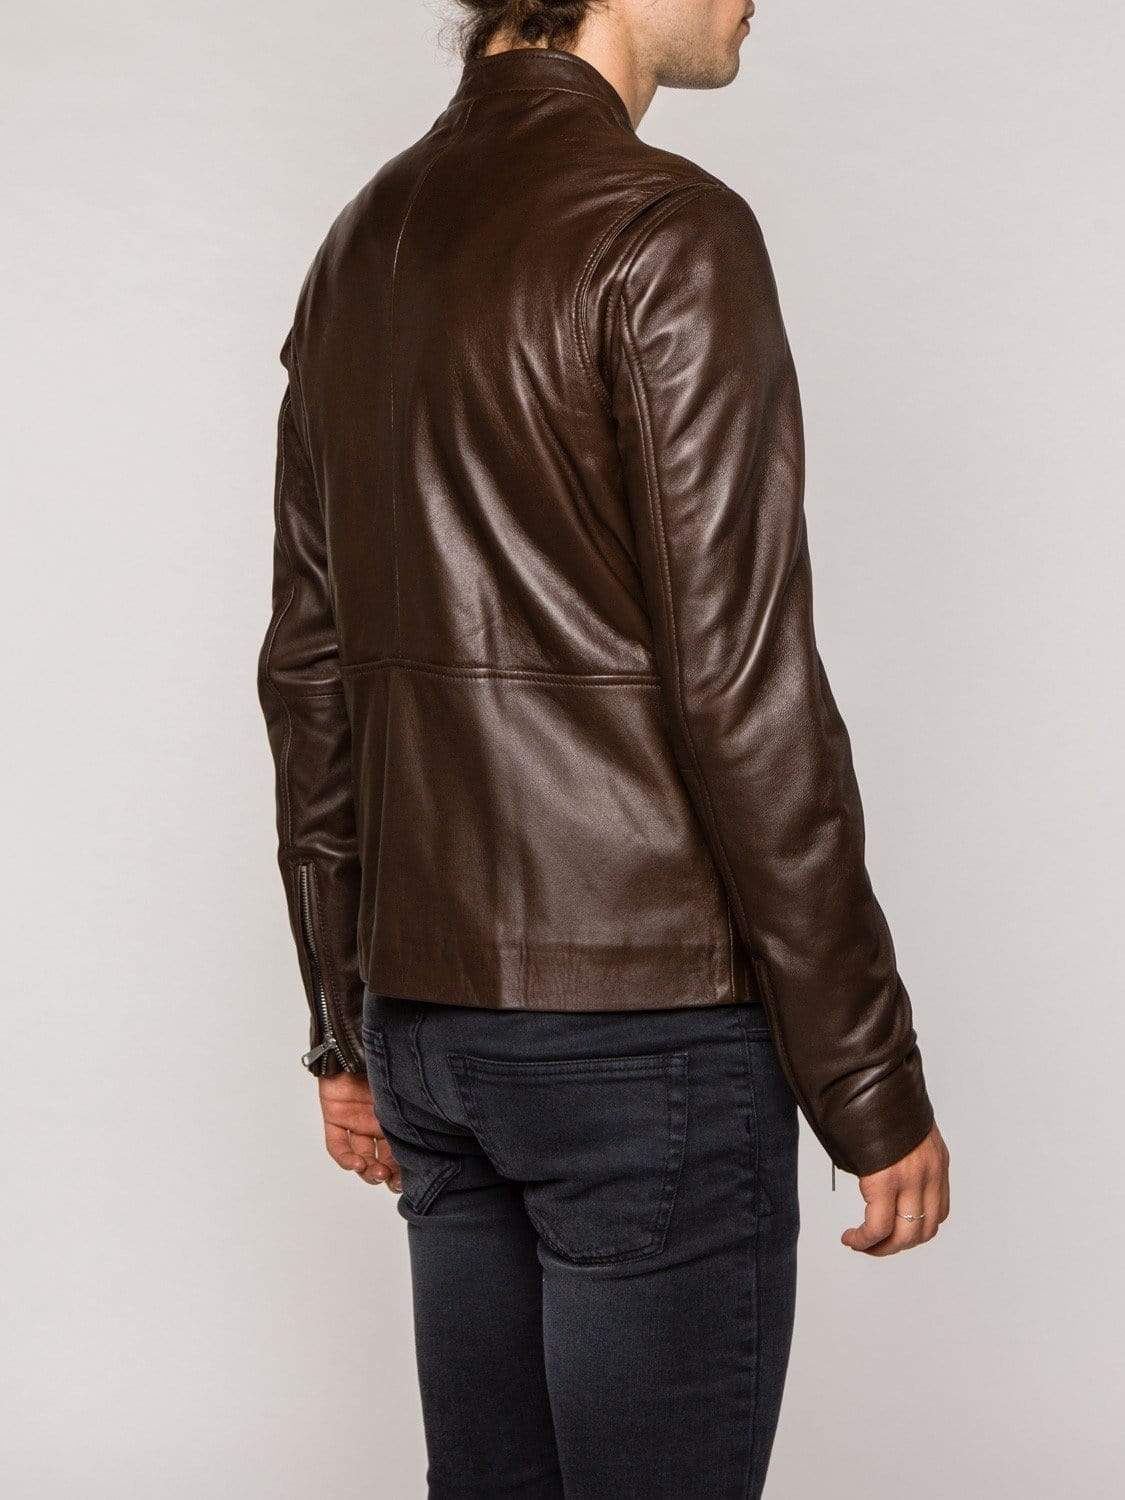 Route - Brown Leather Jacket